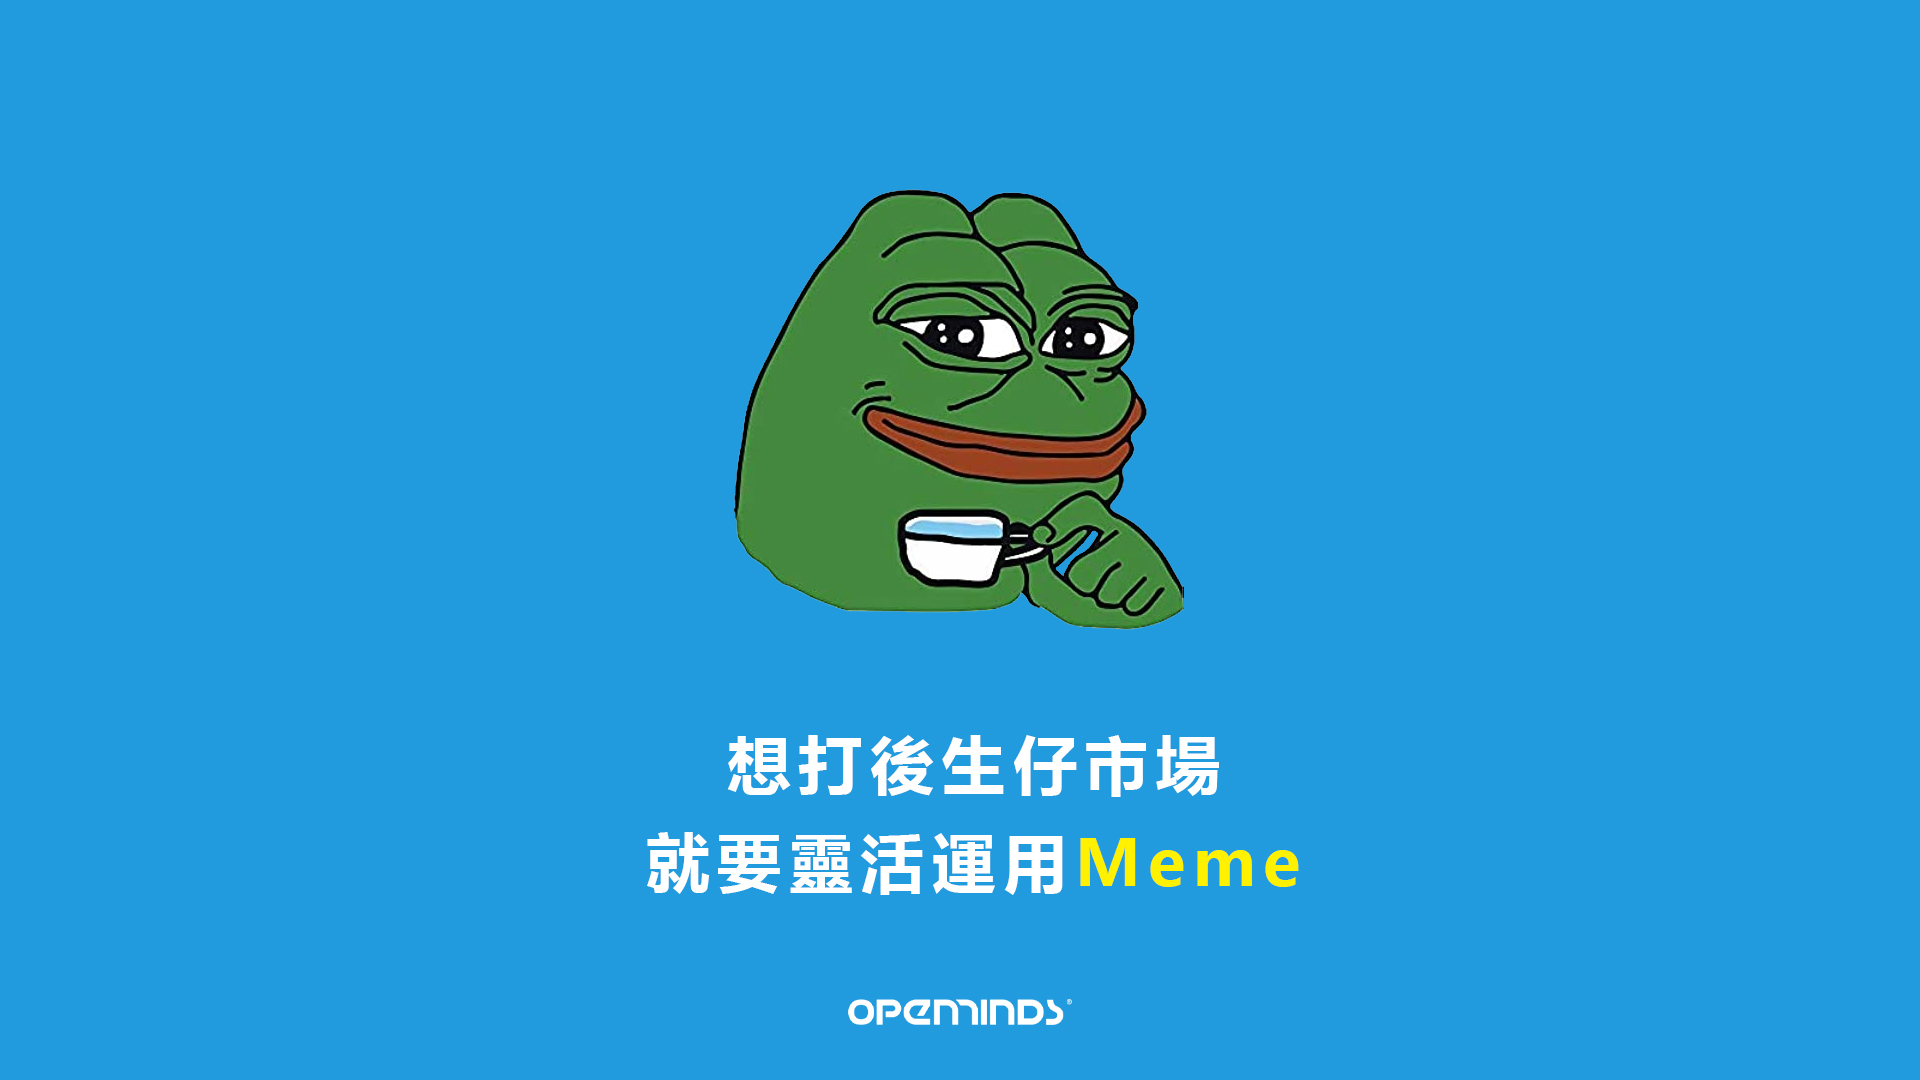 How meme can help you with marketing